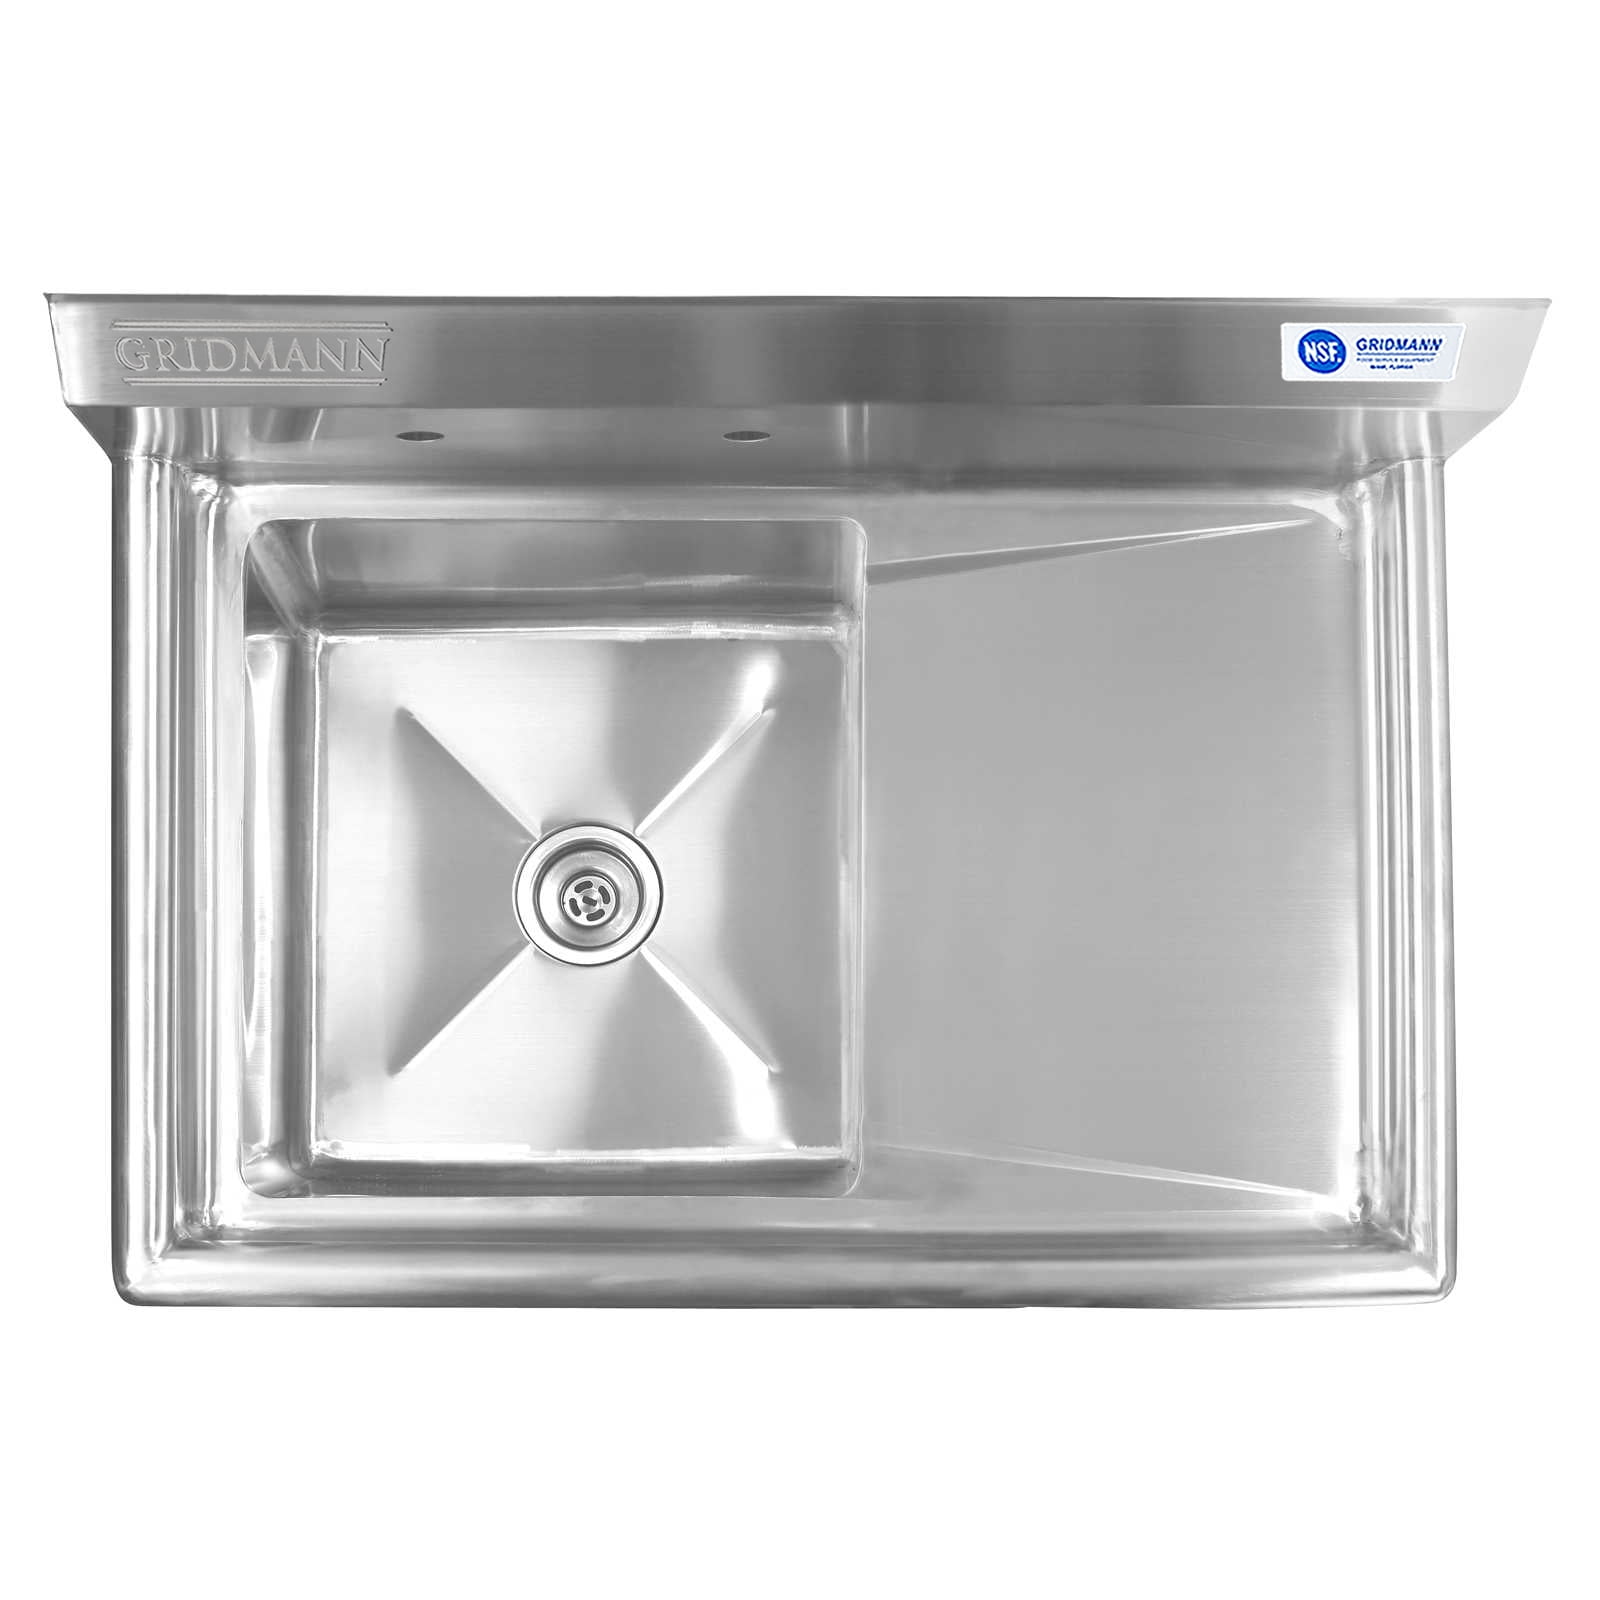 Gridmann 1 Compartment Nsf Stainless Steel Commercial